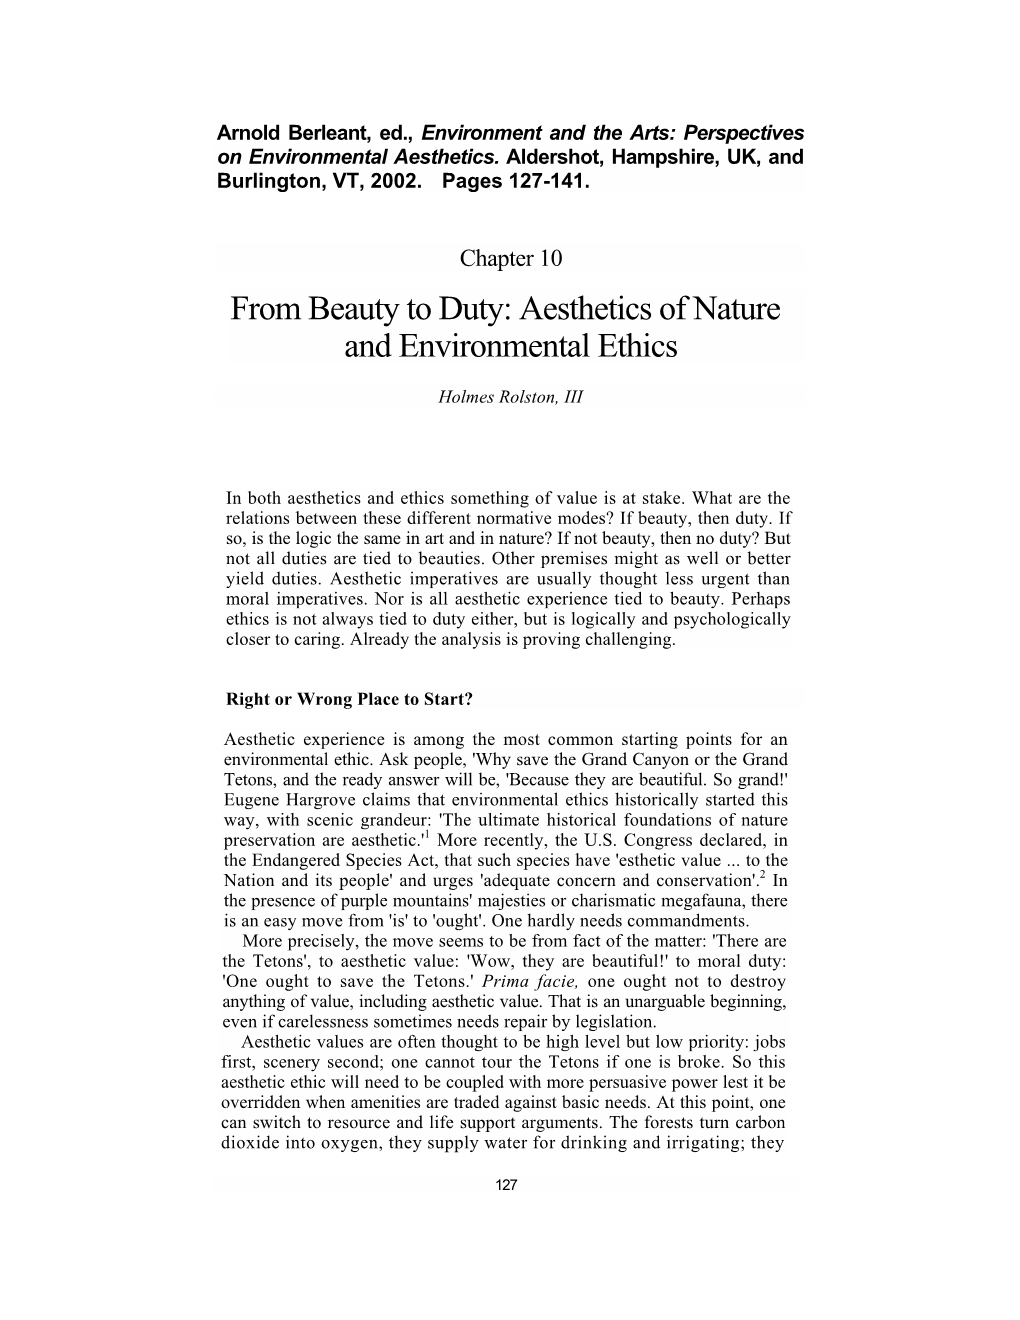 From Beauty to Duty: Aesthetics of Nature and Environmental Ethics